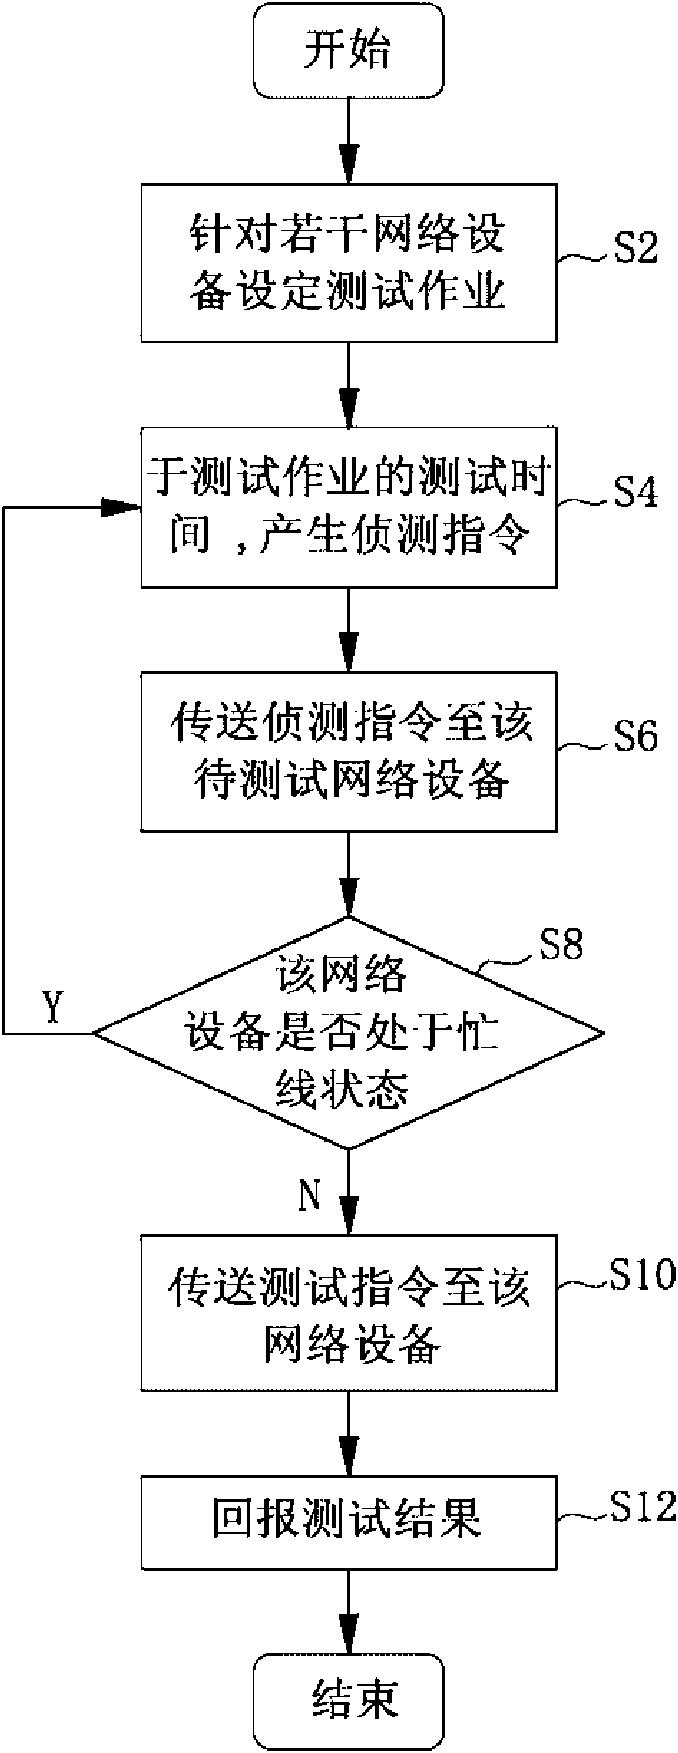 Network management system and method using same for testing network equipment